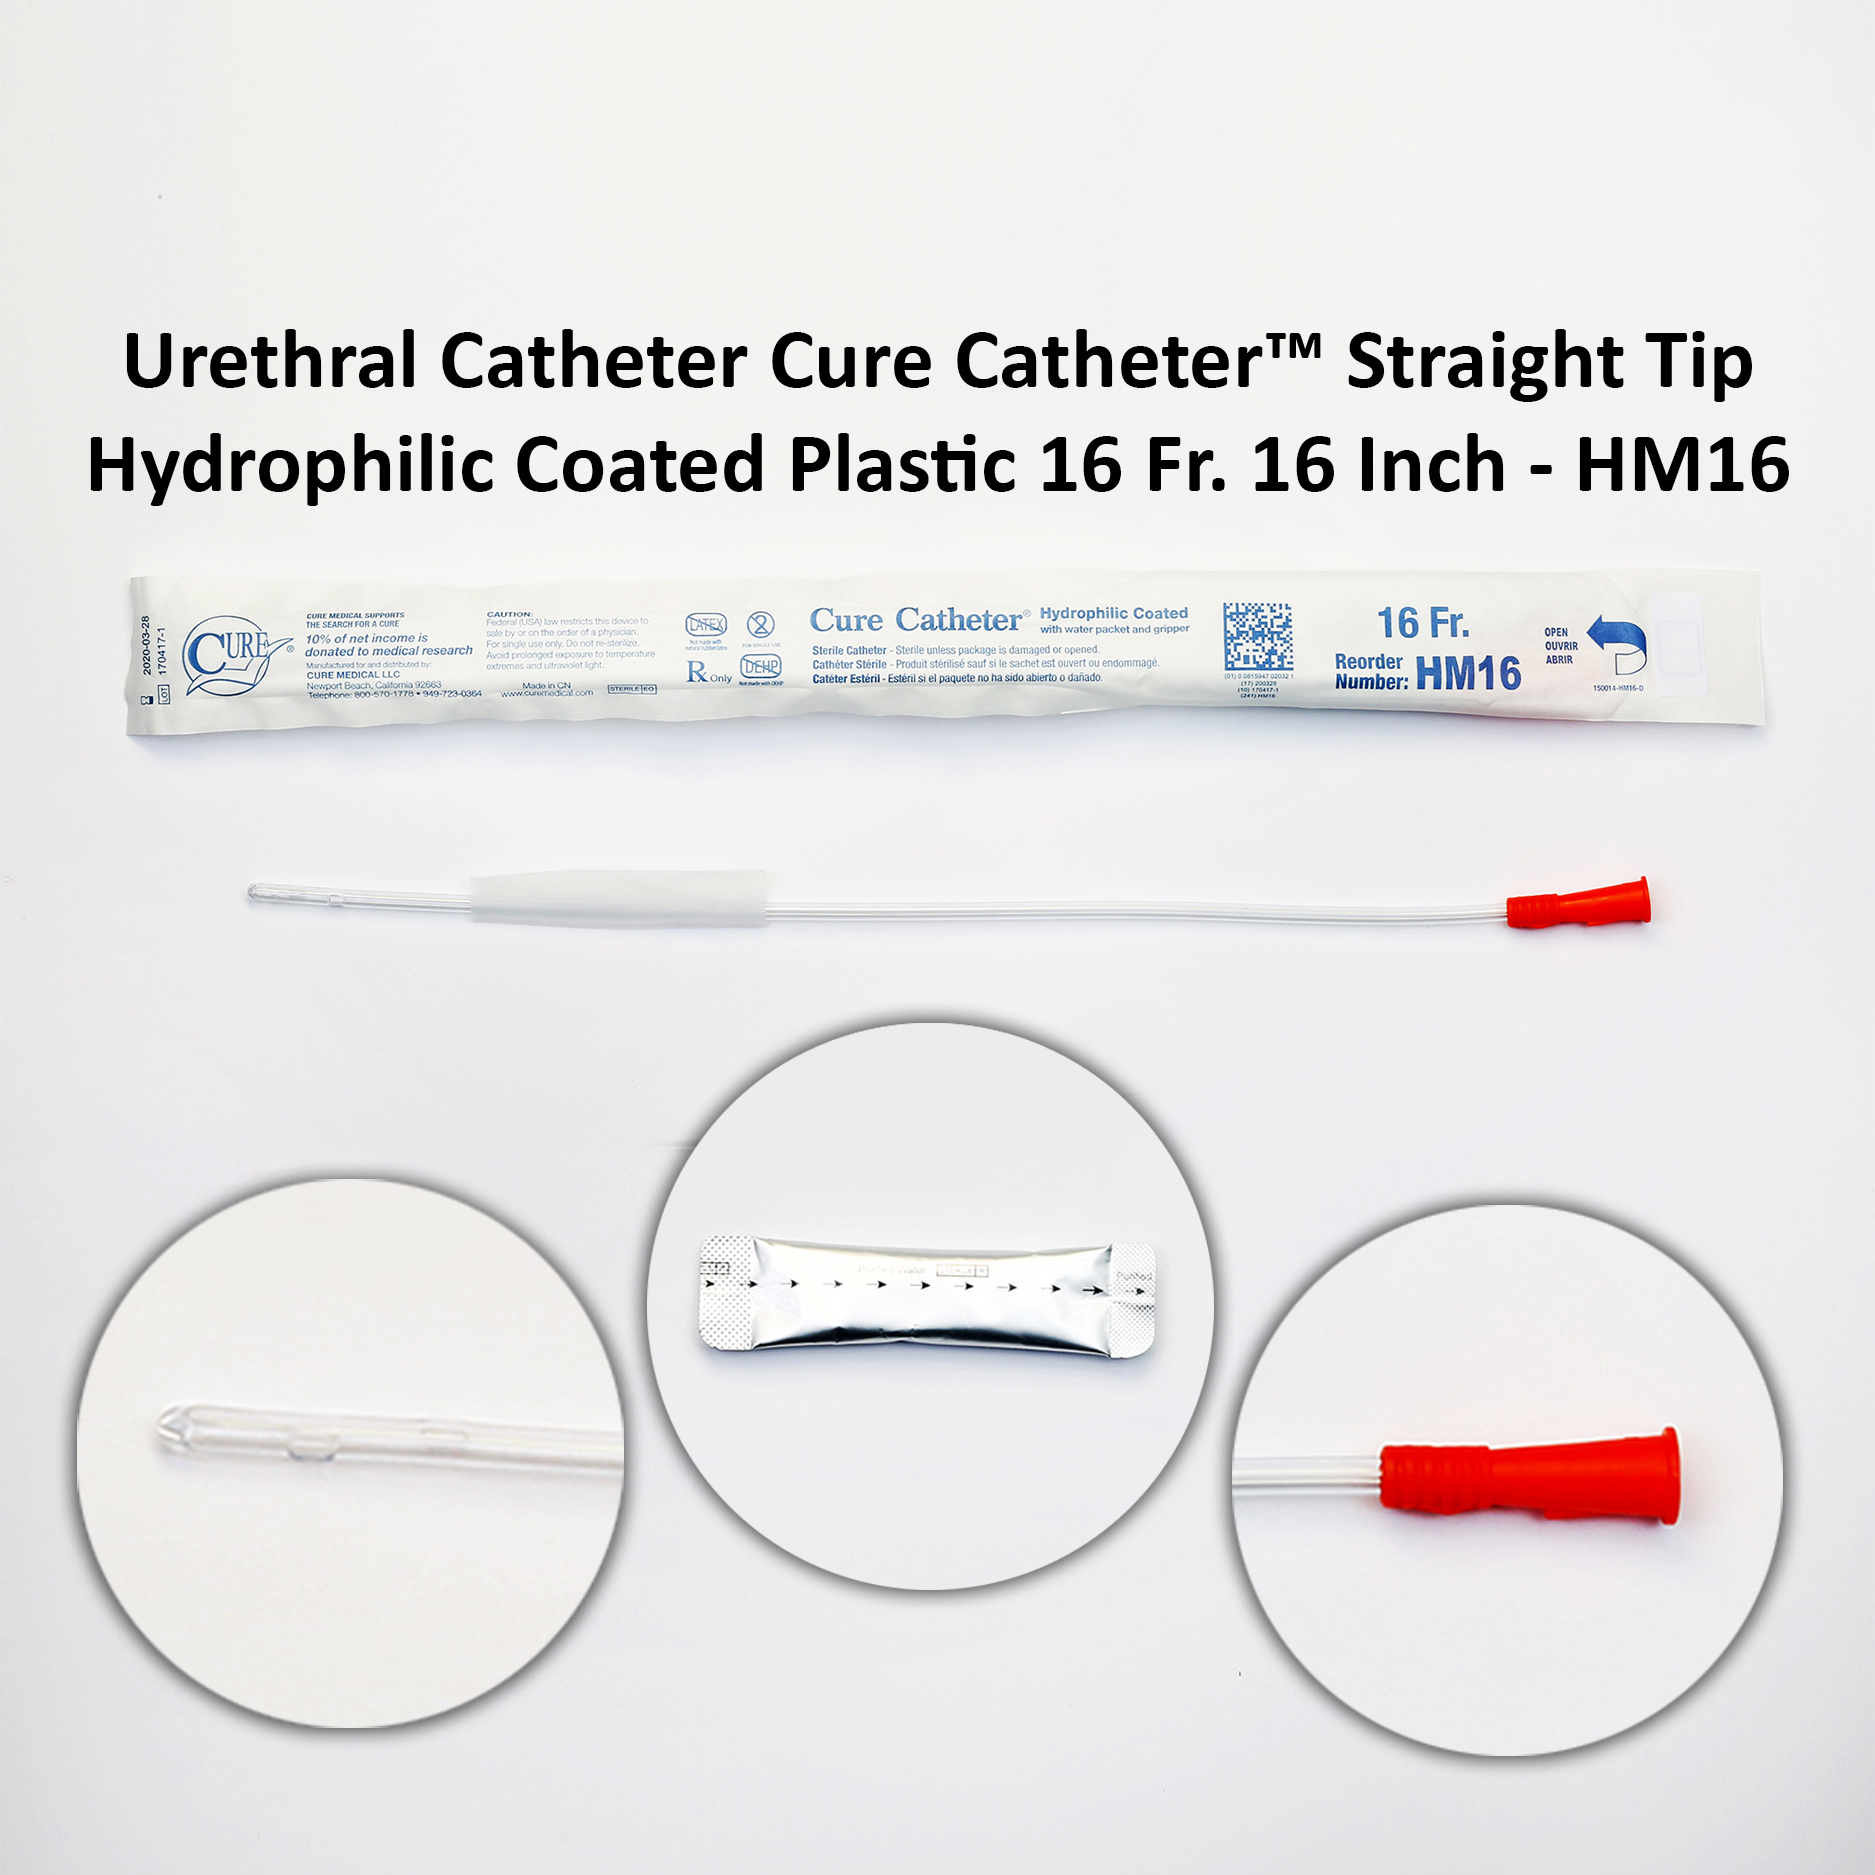 Urethral Catheter Cure Catheter™ Straight Tip Hydrophilic Coated Plastic 16 Fr. 16 Inch - HM16 Michigan | USA